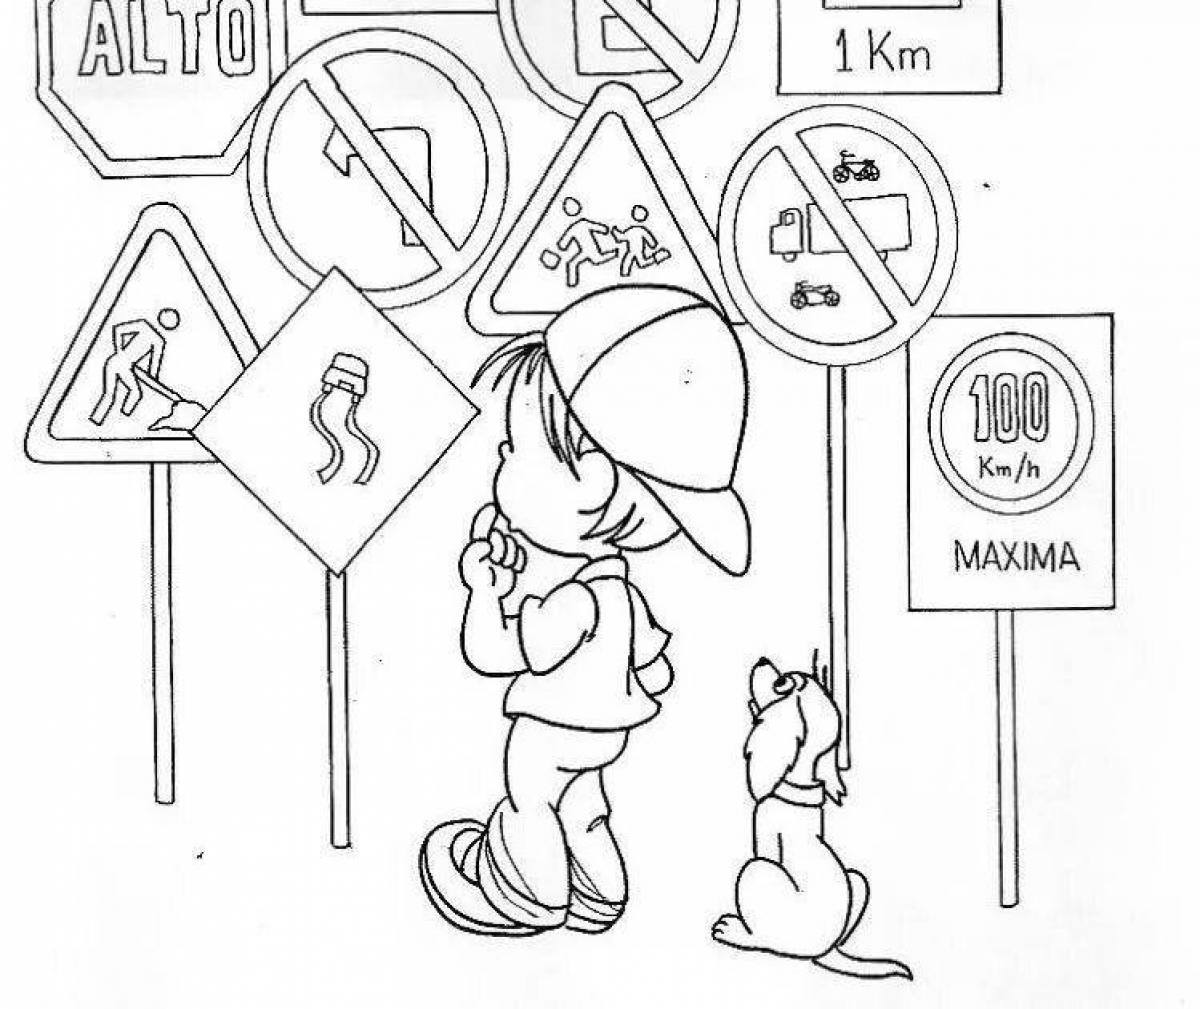 Traffic signs for kids in pictures #11